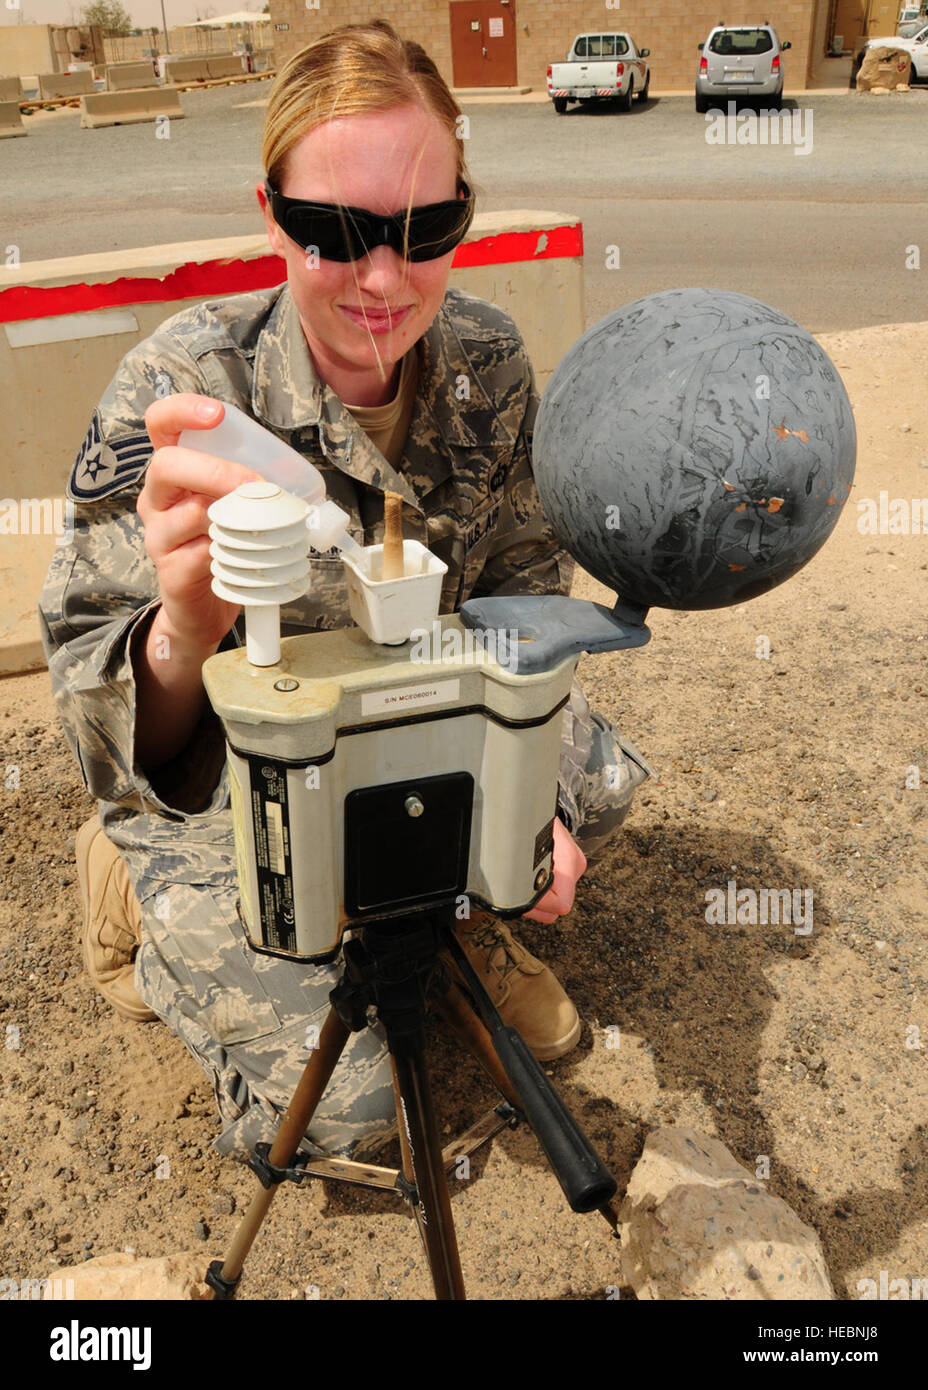 Staff Sgt. Stacy Vandenwyngaard, 386th Expeditionary Operations Support Squadron, adds distilled water to the heat stress monitor to ensure accurate Wet Bulb Globe temperature readings. The Wet Bulb Globe Temperature is a composite temperature used to estimate the effect of temperature, humidity, wind speed and solar radiation on humans, determining the heat stress category used for work/rest cycles. Sergeant Vandenwyngaard is currently deployed from Charleston Air Force Base, S.C., and is originally from Appleton, Wis. (U.S. Air Force photo/ Senior Airman Courtney Richardson) Stock Photo